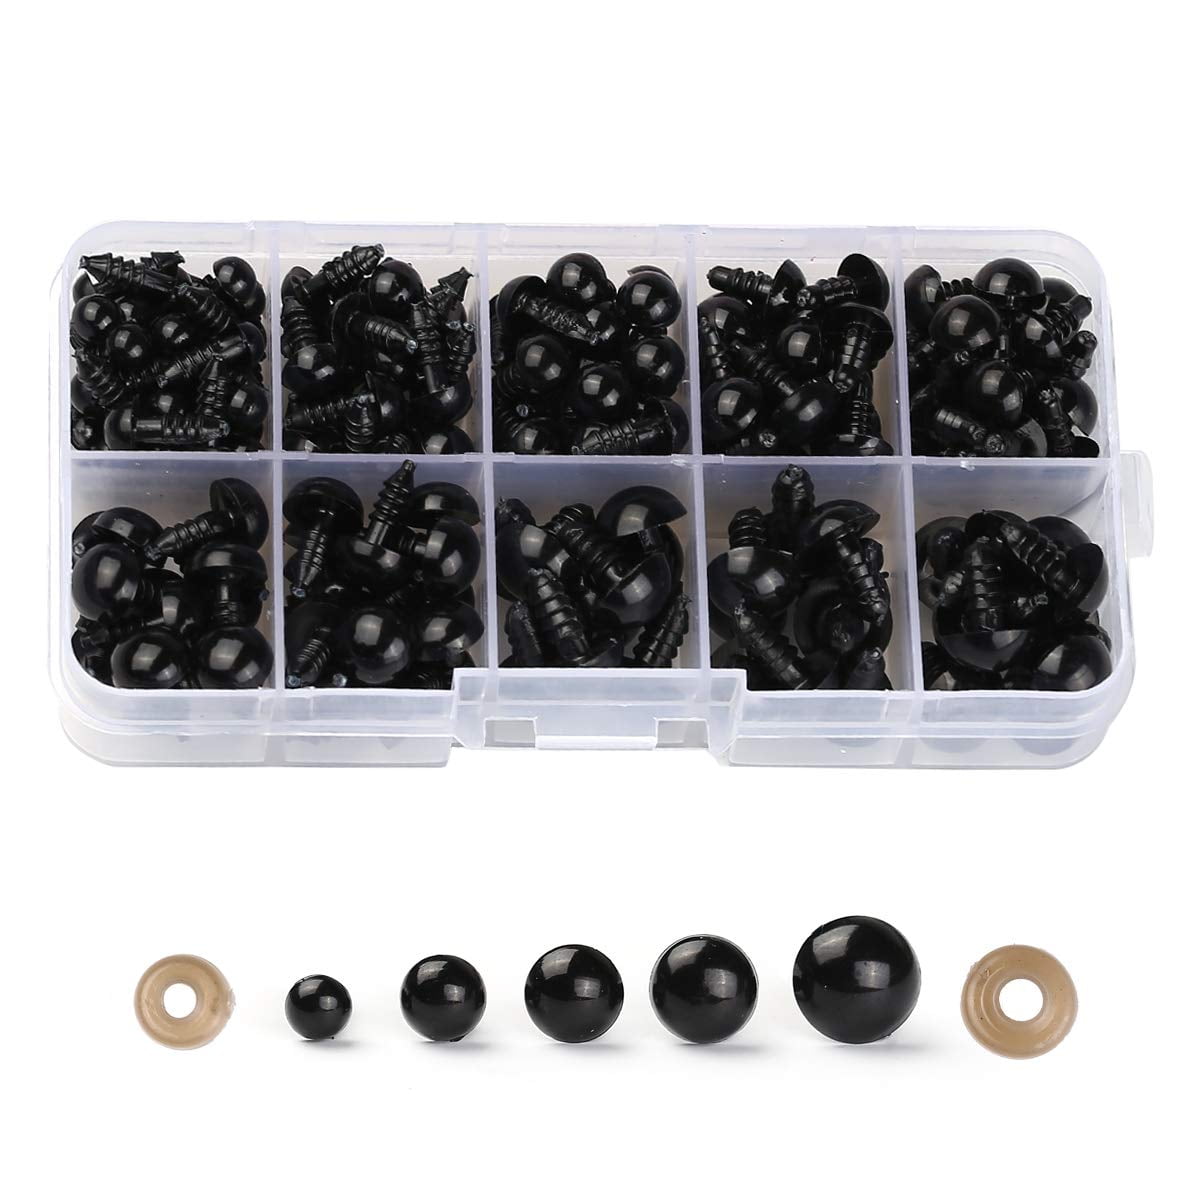 100pcs/lot 6mm-16mm Black Plastic Safety Eye With Pads For Dolls Toys Diy Craft 